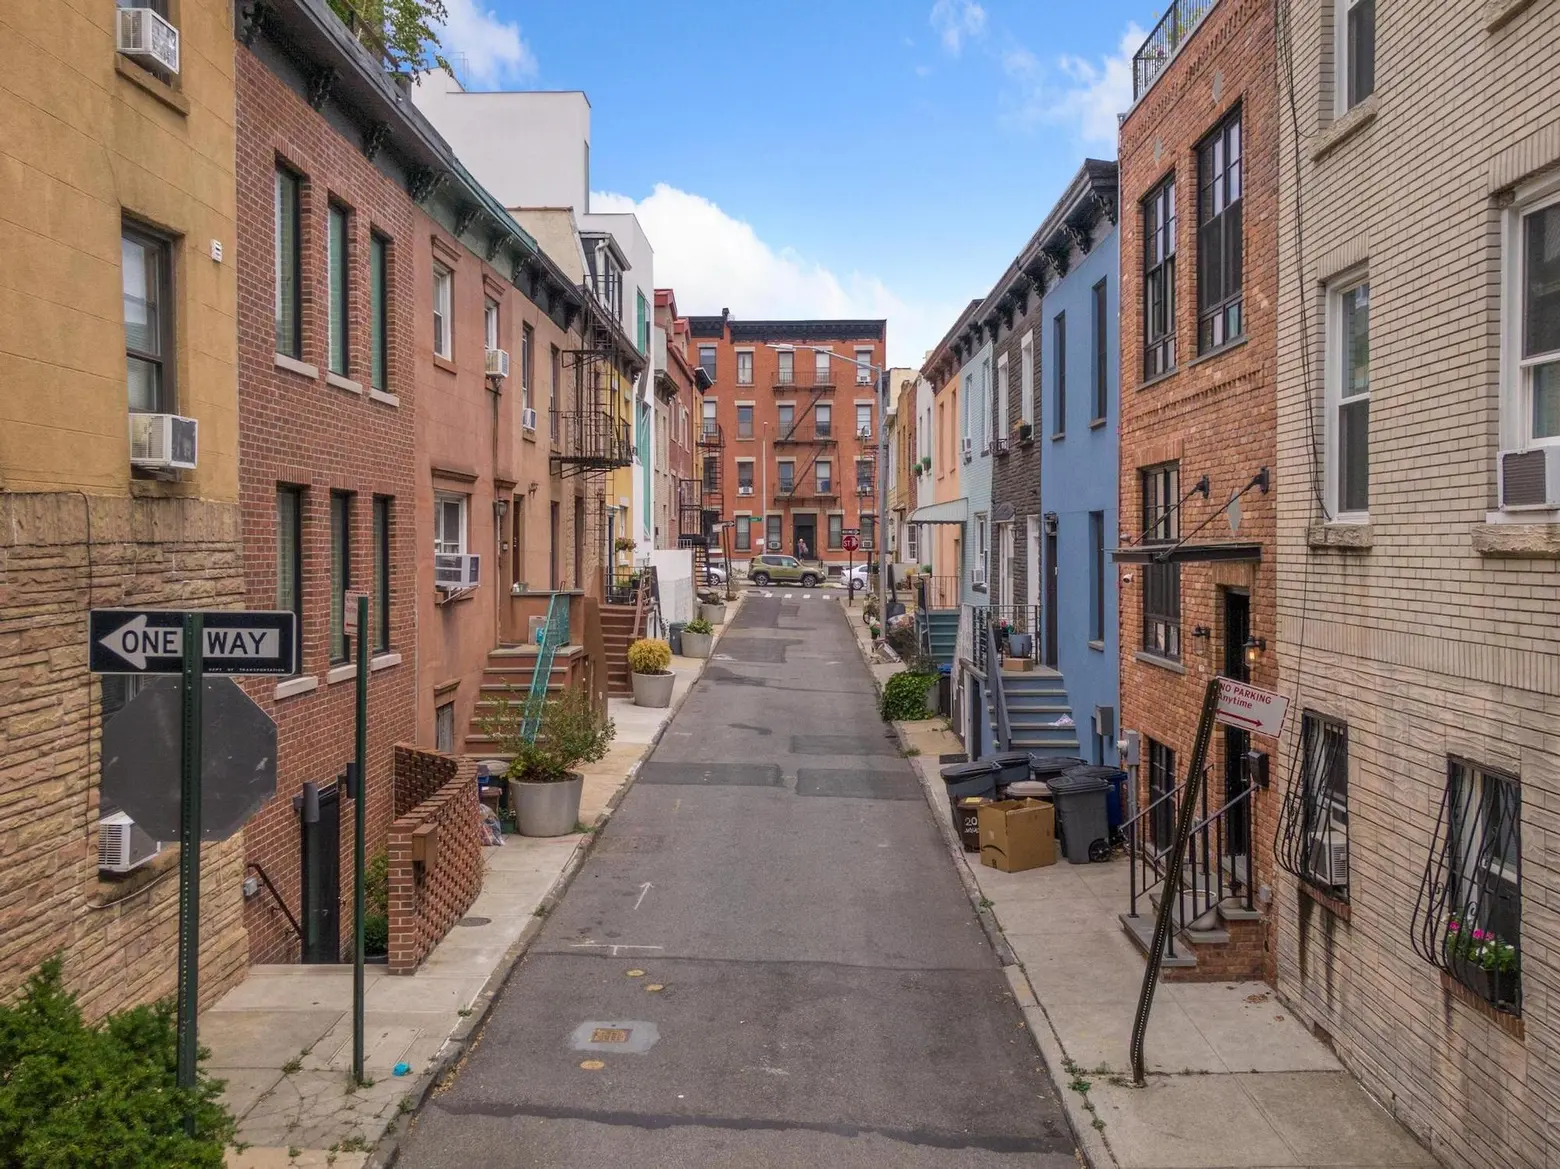 Asking $3.2M, a rare pair of townhouses on Brooklyn’s quaint ‘secret’ block with tiny doors